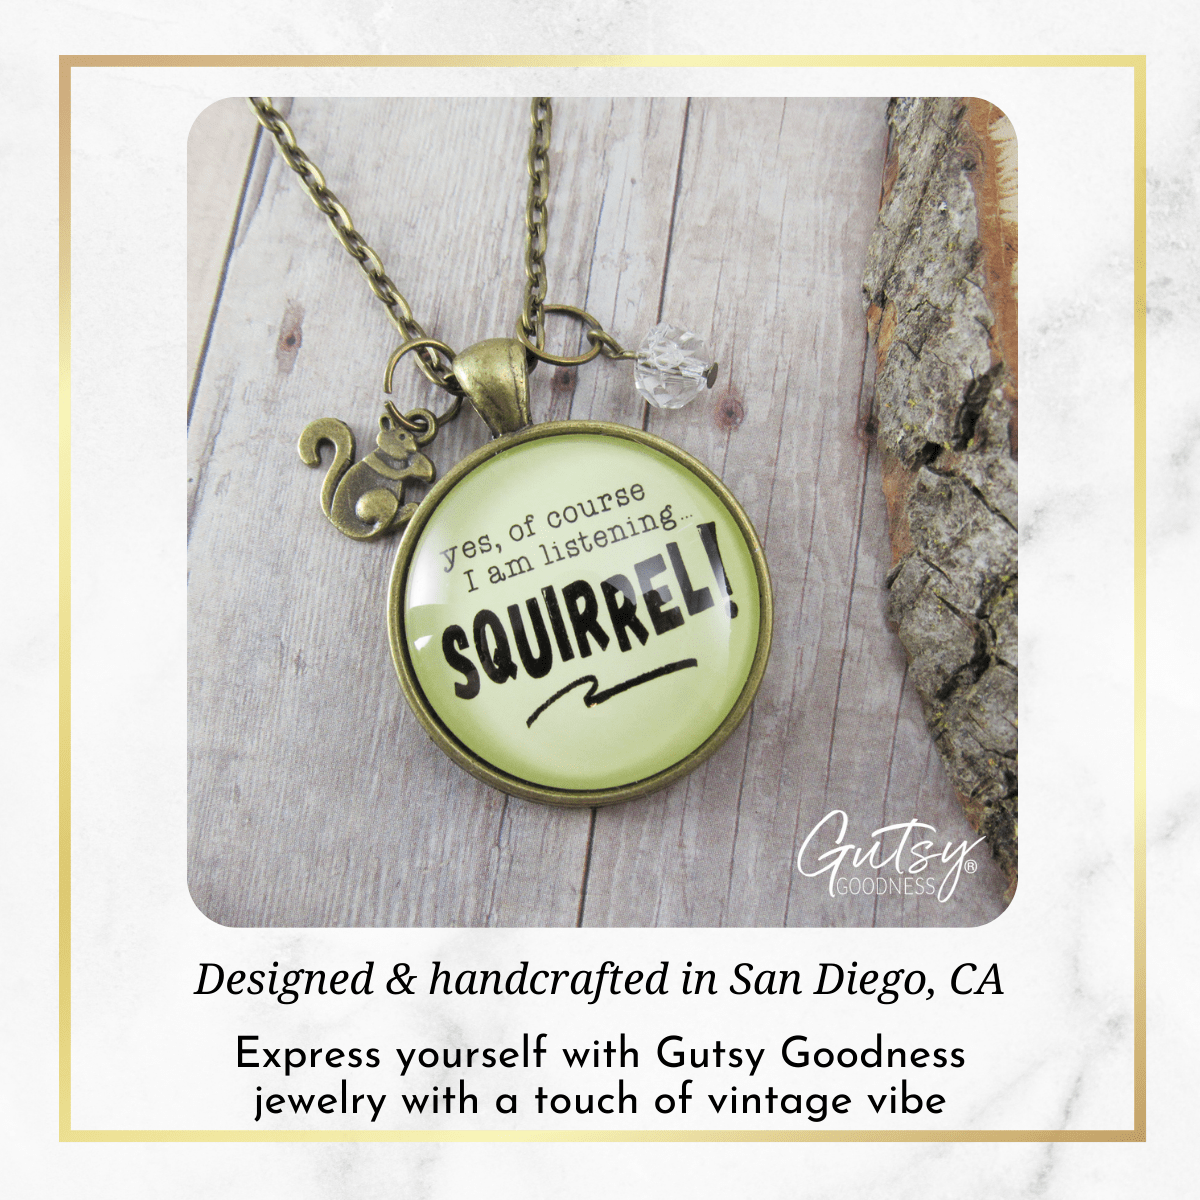 Gutsy Goodness Squirrel Necklace ADHD Funny Listening Focus Jewelry Animal Charm - Gutsy Goodness Handmade Jewelry;Squirrel Necklace Adhd Funny Listening Focus Jewelry Animal Charm - Gutsy Goodness Handmade Jewelry Gifts